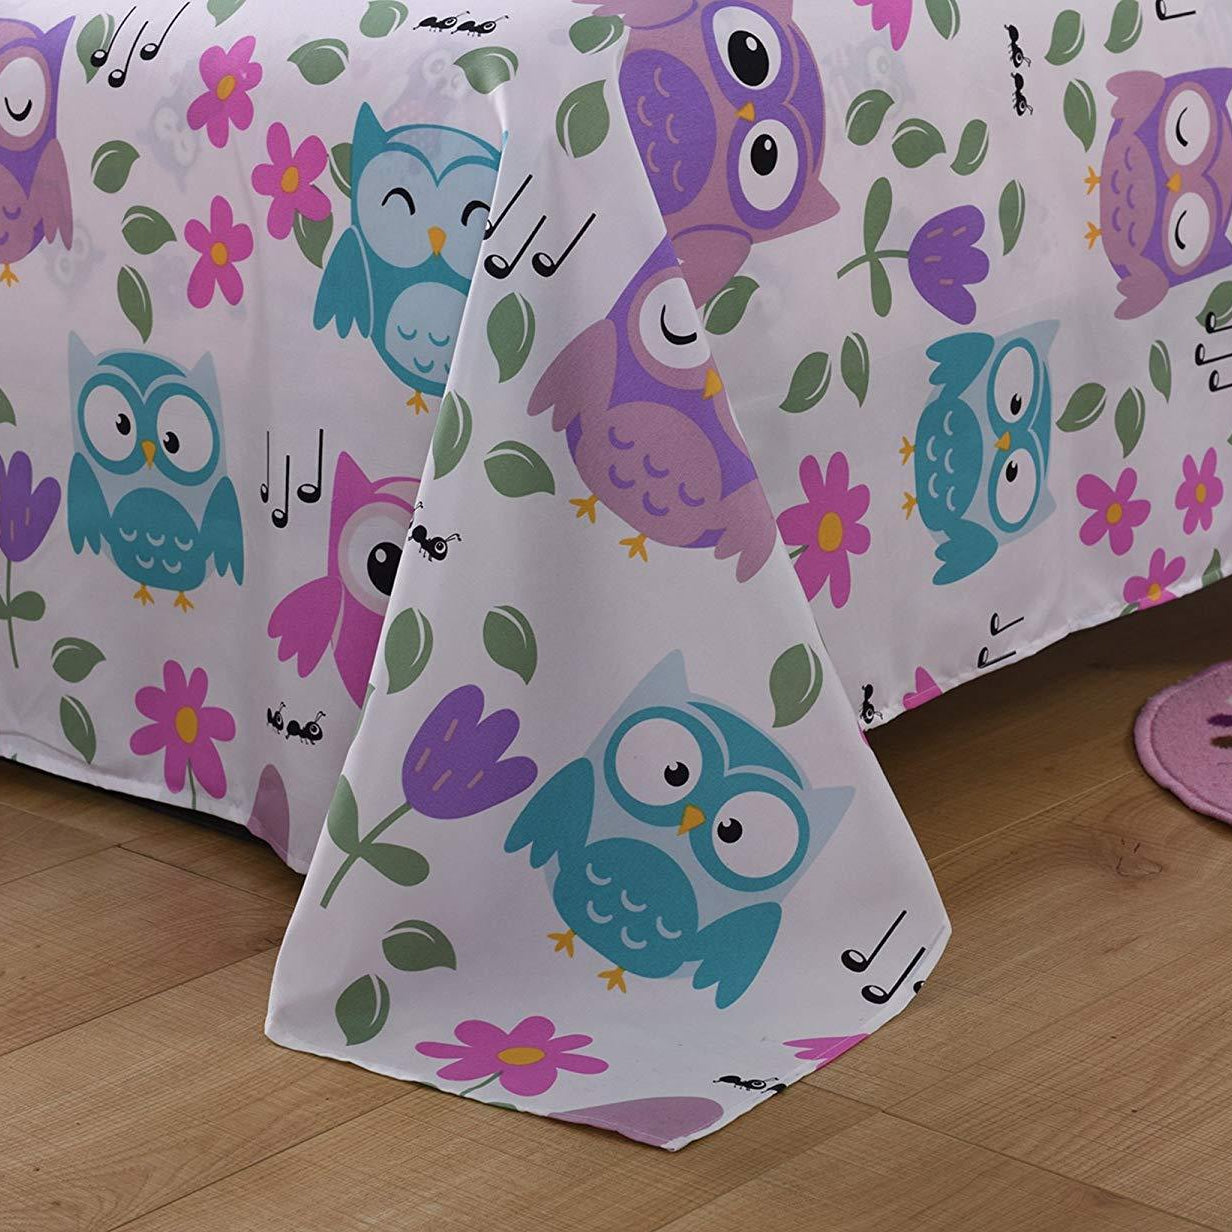 Bed Sheets For Kids Twin Full Sheets For Kids Girls Boys Teens Children Sheets SH_A32